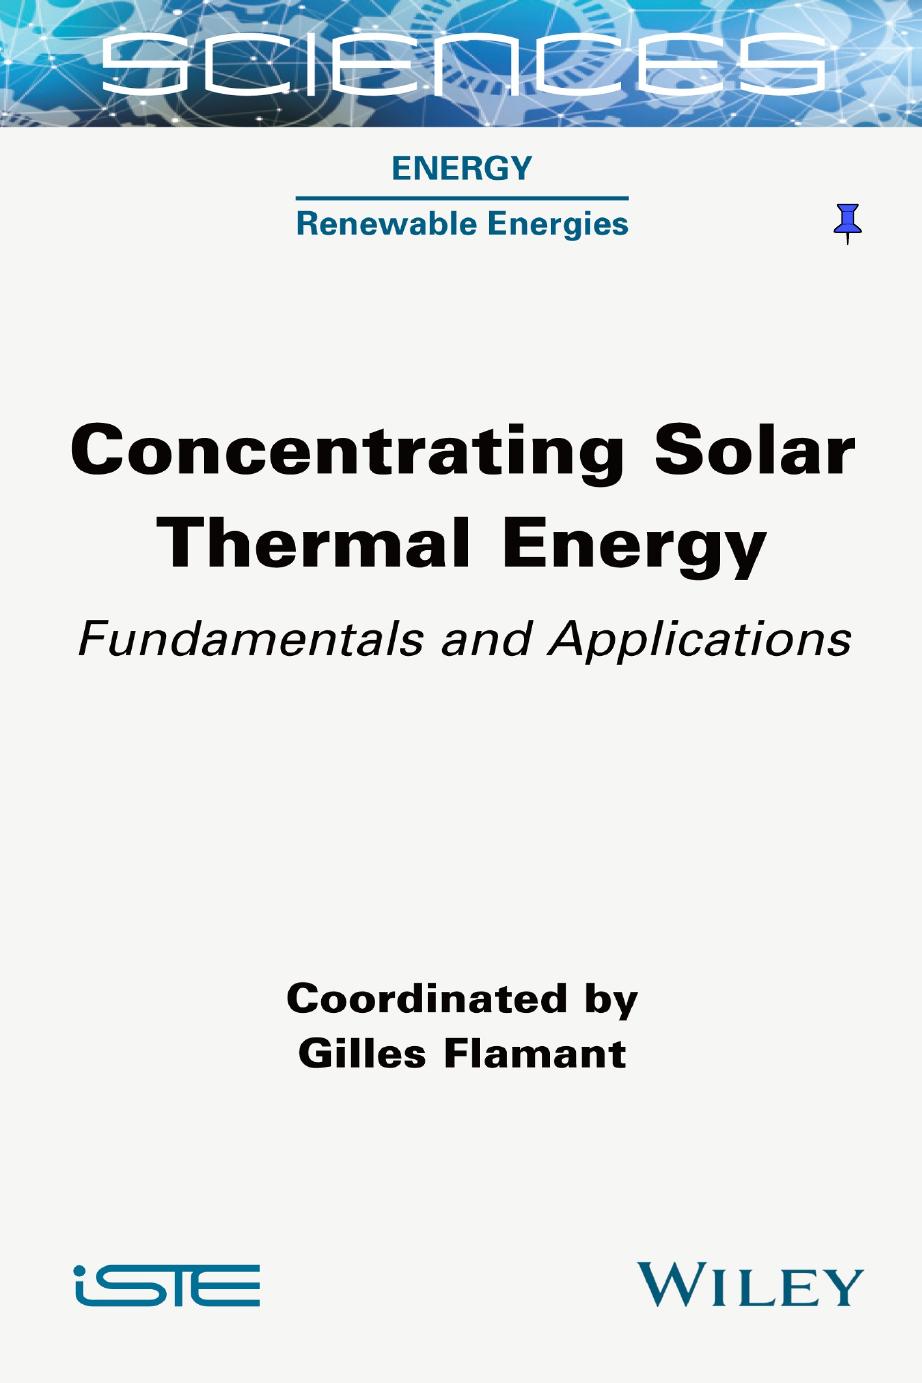 Concentrating Solar Thermal Energy: Fundamentals and Applications by Gilles Flamant